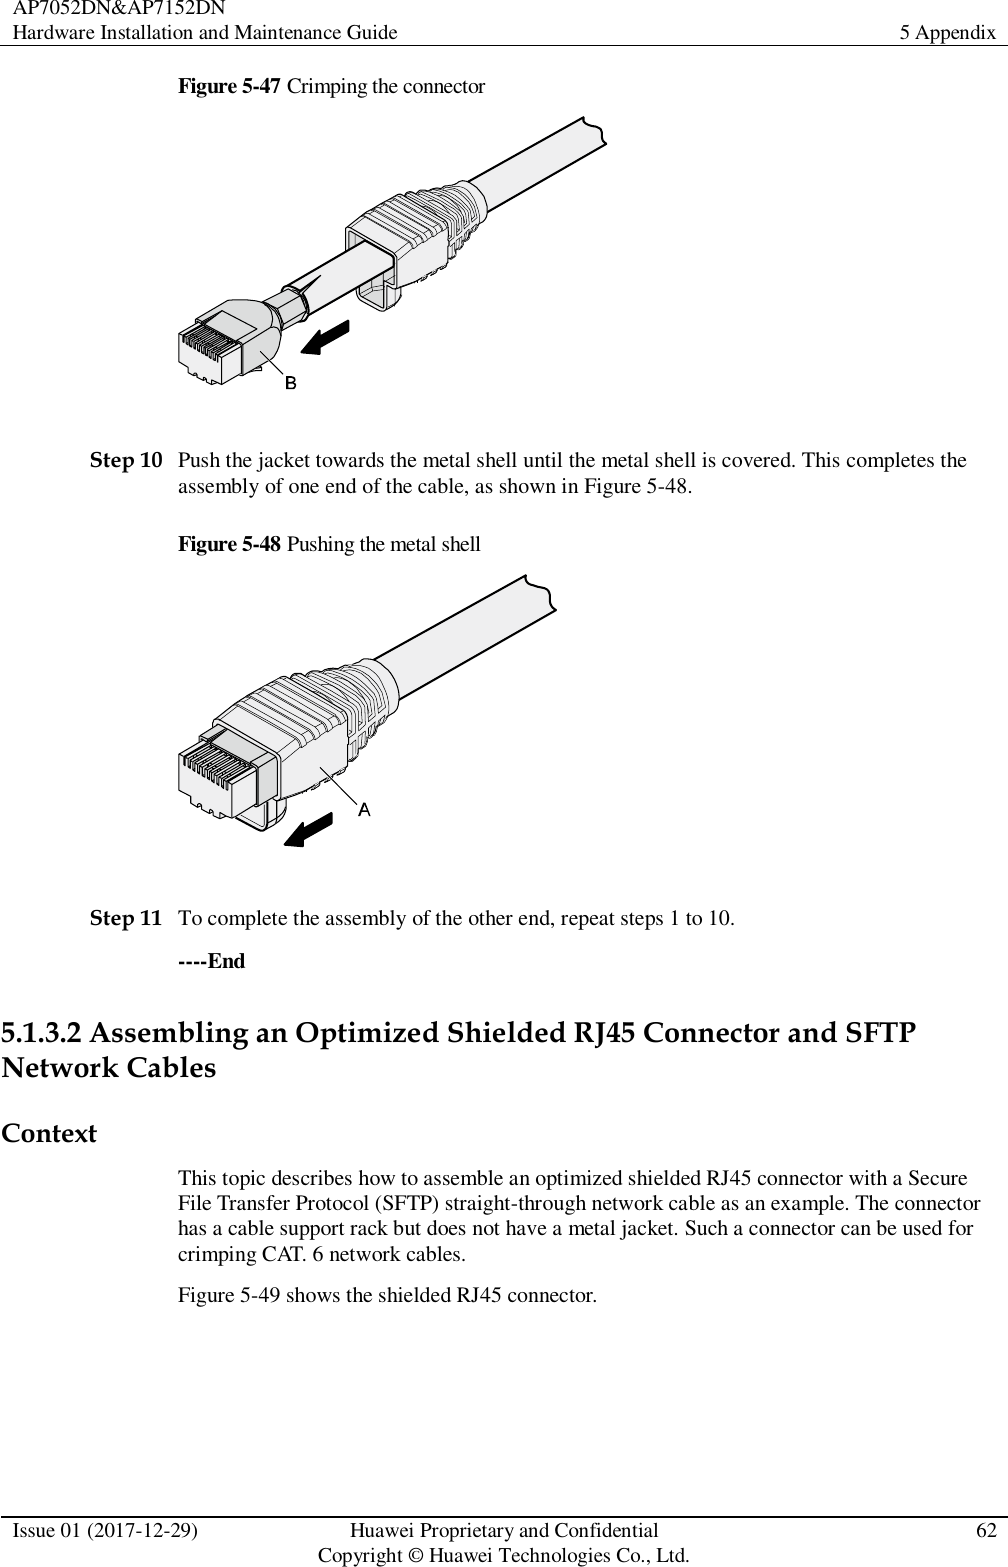 AP7052DN&amp;AP7152DN Hardware Installation and Maintenance Guide 5 Appendix  Issue 01 (2017-12-29) Huawei Proprietary and Confidential                                     Copyright © Huawei Technologies Co., Ltd. 62  Figure 5-47 Crimping the connector   Step 10 Push the jacket towards the metal shell until the metal shell is covered. This completes the assembly of one end of the cable, as shown in Figure 5-48. Figure 5-48 Pushing the metal shell   Step 11 To complete the assembly of the other end, repeat steps 1 to 10. ----End 5.1.3.2 Assembling an Optimized Shielded RJ45 Connector and SFTP Network Cables Context This topic describes how to assemble an optimized shielded RJ45 connector with a Secure File Transfer Protocol (SFTP) straight-through network cable as an example. The connector has a cable support rack but does not have a metal jacket. Such a connector can be used for crimping CAT. 6 network cables. Figure 5-49 shows the shielded RJ45 connector. 